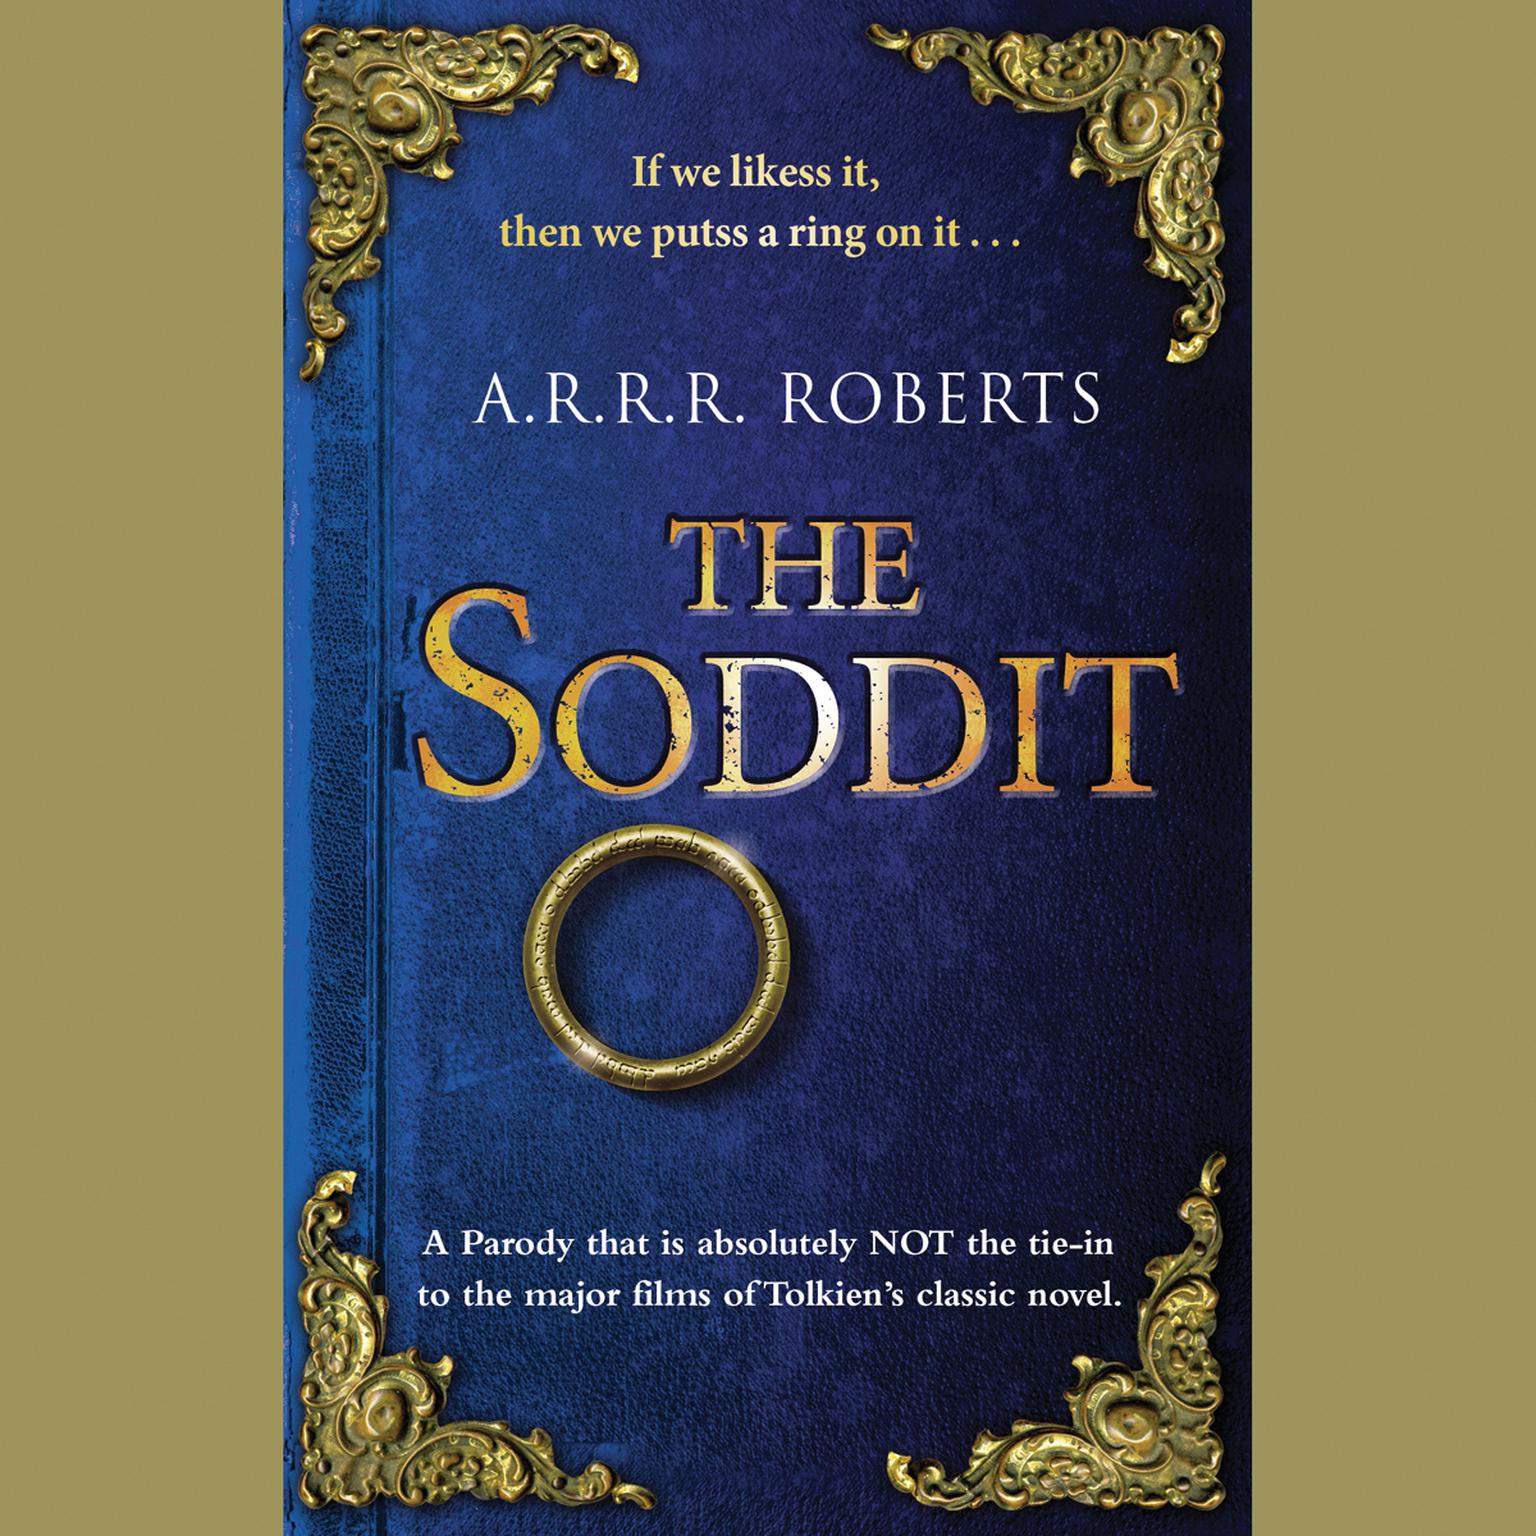 The Soddit (Abridged): Or, Lets Cash in Again Audiobook, by A. R. R. R. Roberts